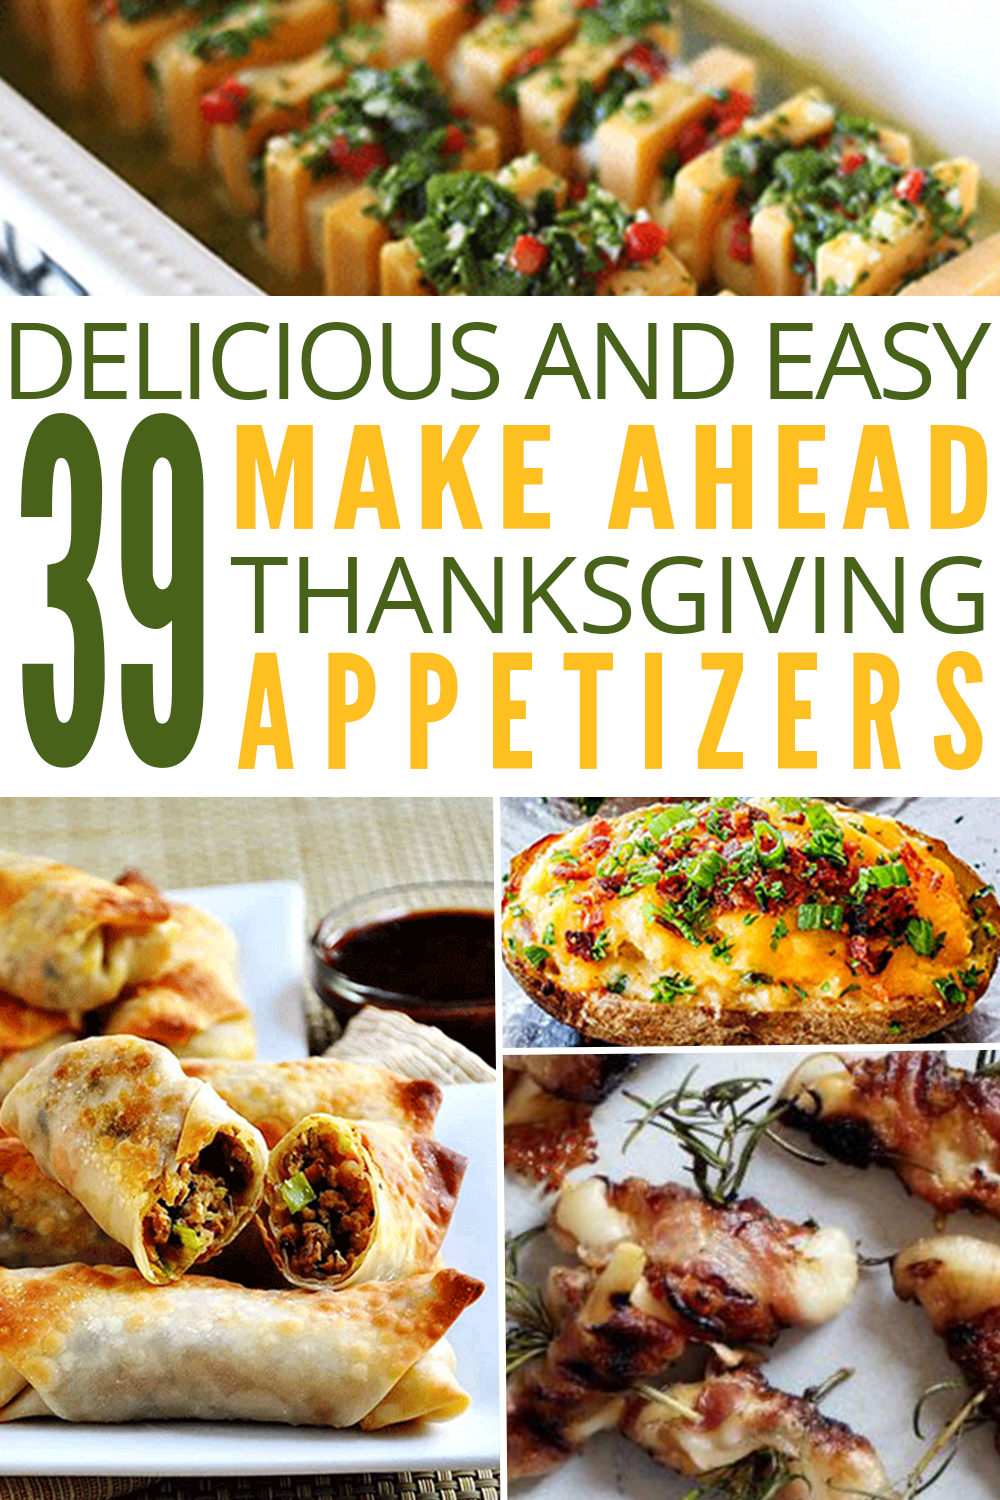 19 thanksgiving appetizers make ahead ideas